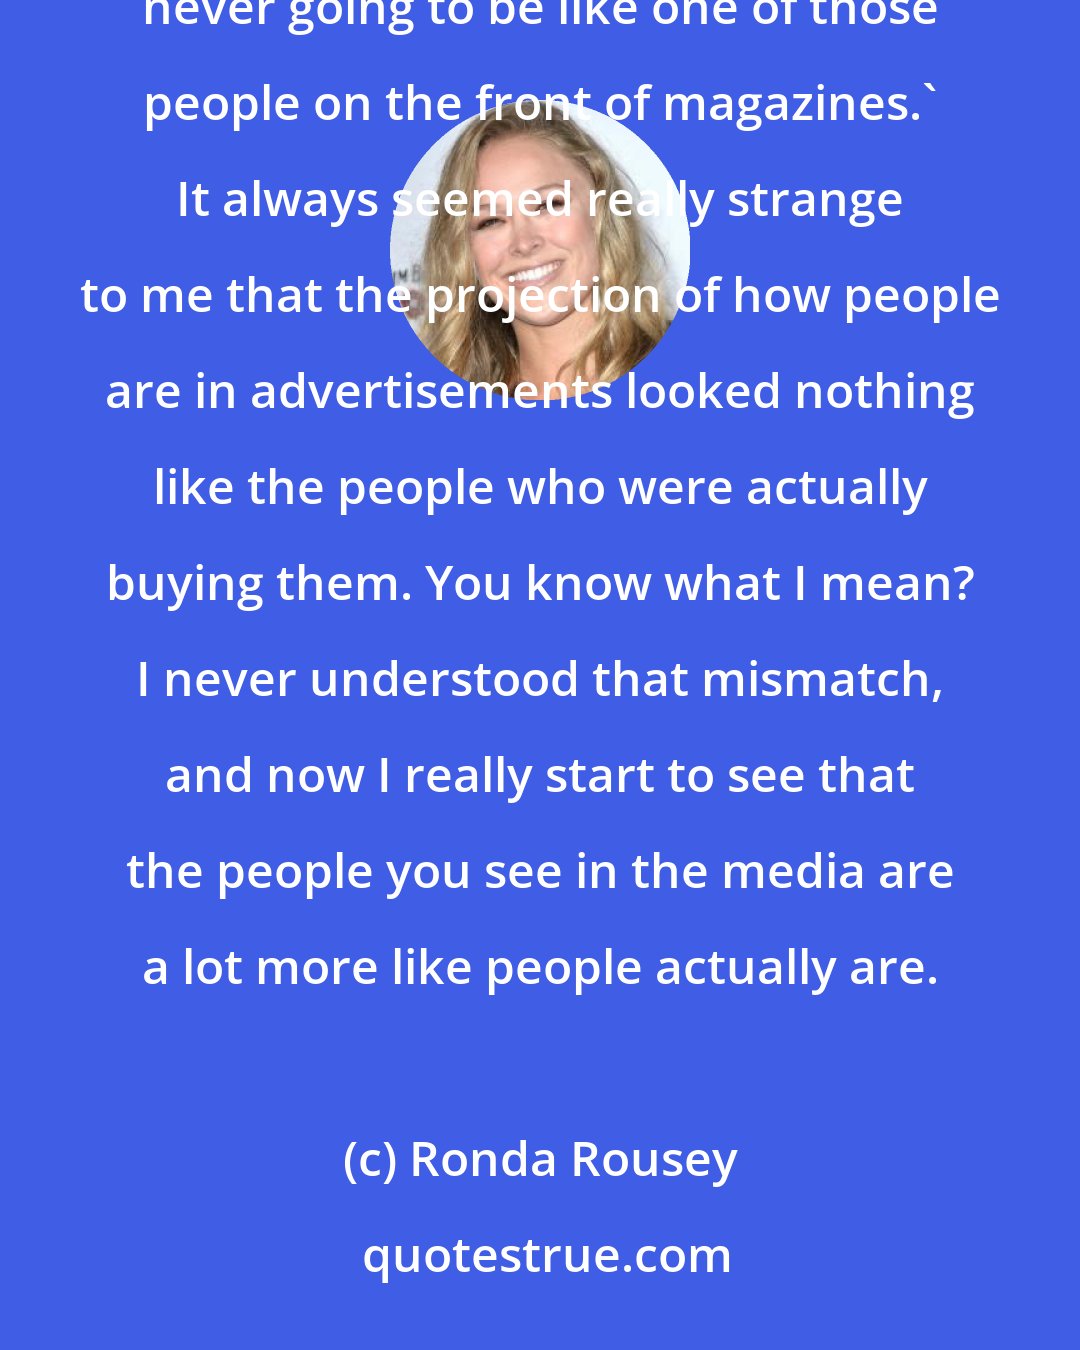 Ronda Rousey: There have been times in my adolescence where I gave up. I was like, 'I'm just never going to be pretty. I'm never going to be like one of those people on the front of magazines.' It always seemed really strange to me that the projection of how people are in advertisements looked nothing like the people who were actually buying them. You know what I mean? I never understood that mismatch, and now I really start to see that the people you see in the media are a lot more like people actually are.